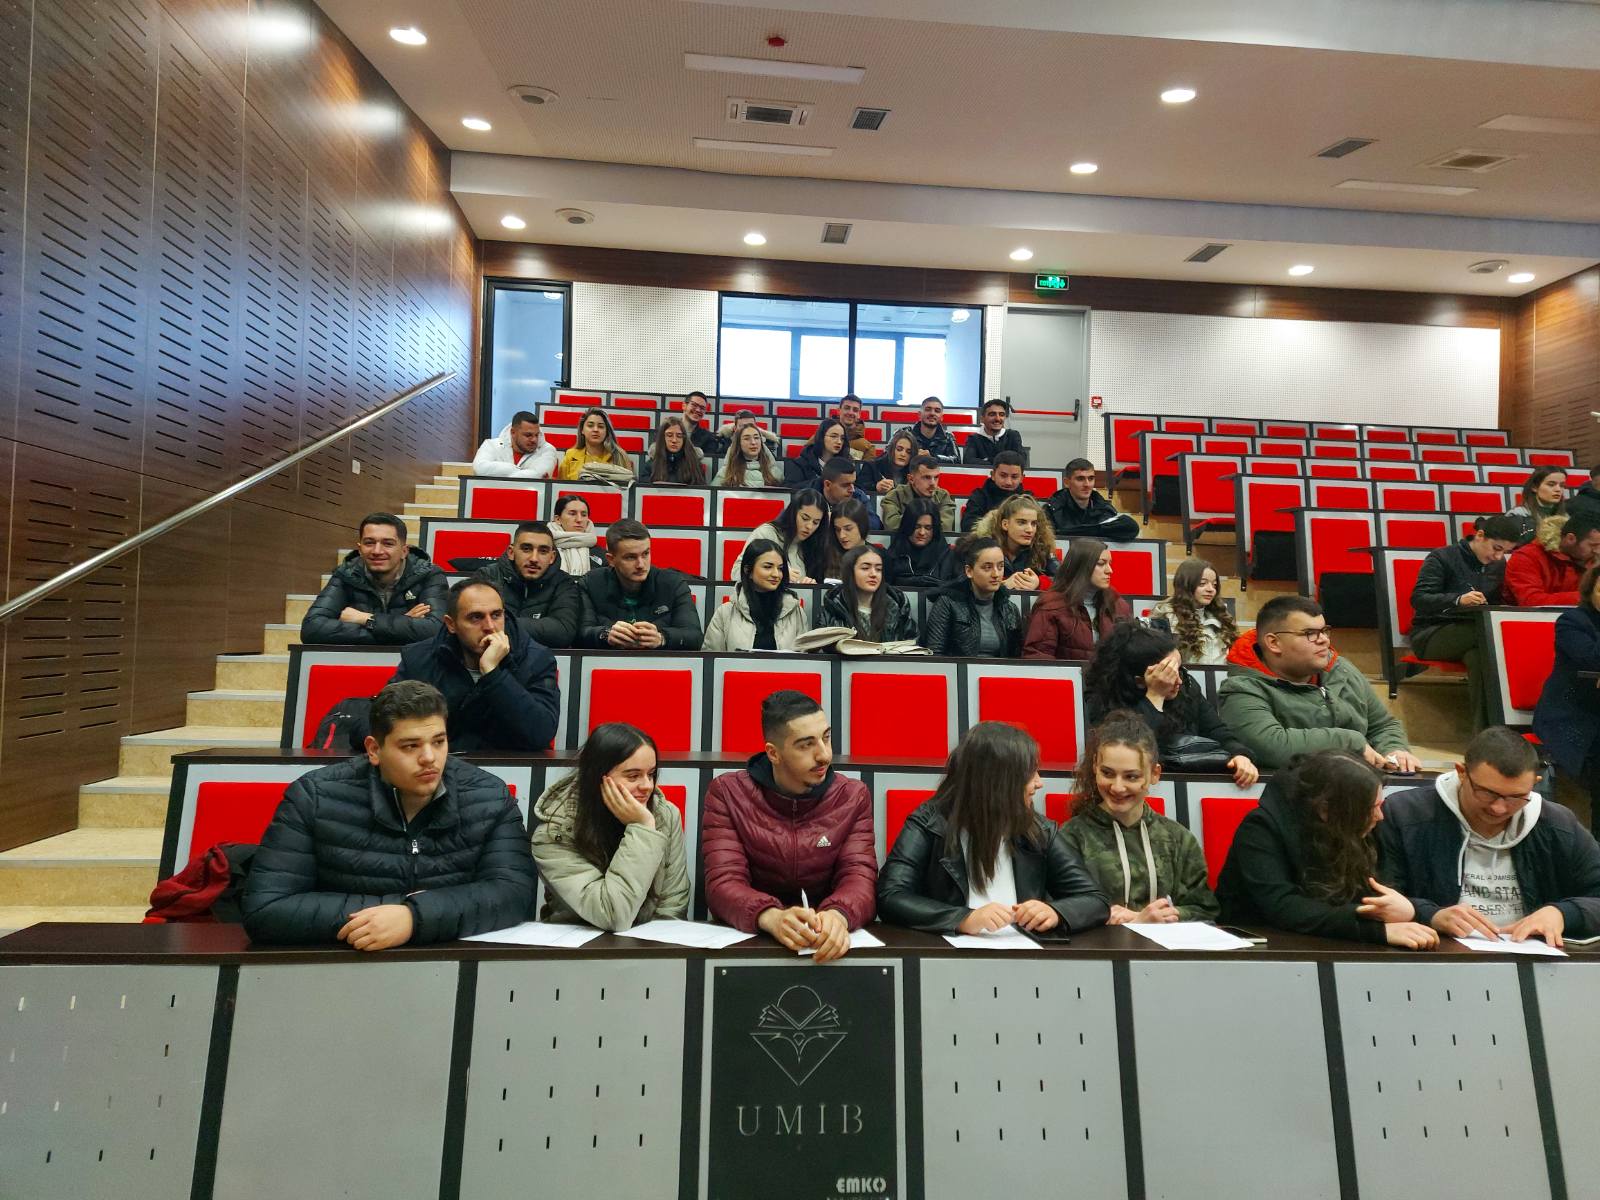 The Information Day For The Projects And Scholarships Of The Erasmus+ Program Is Held